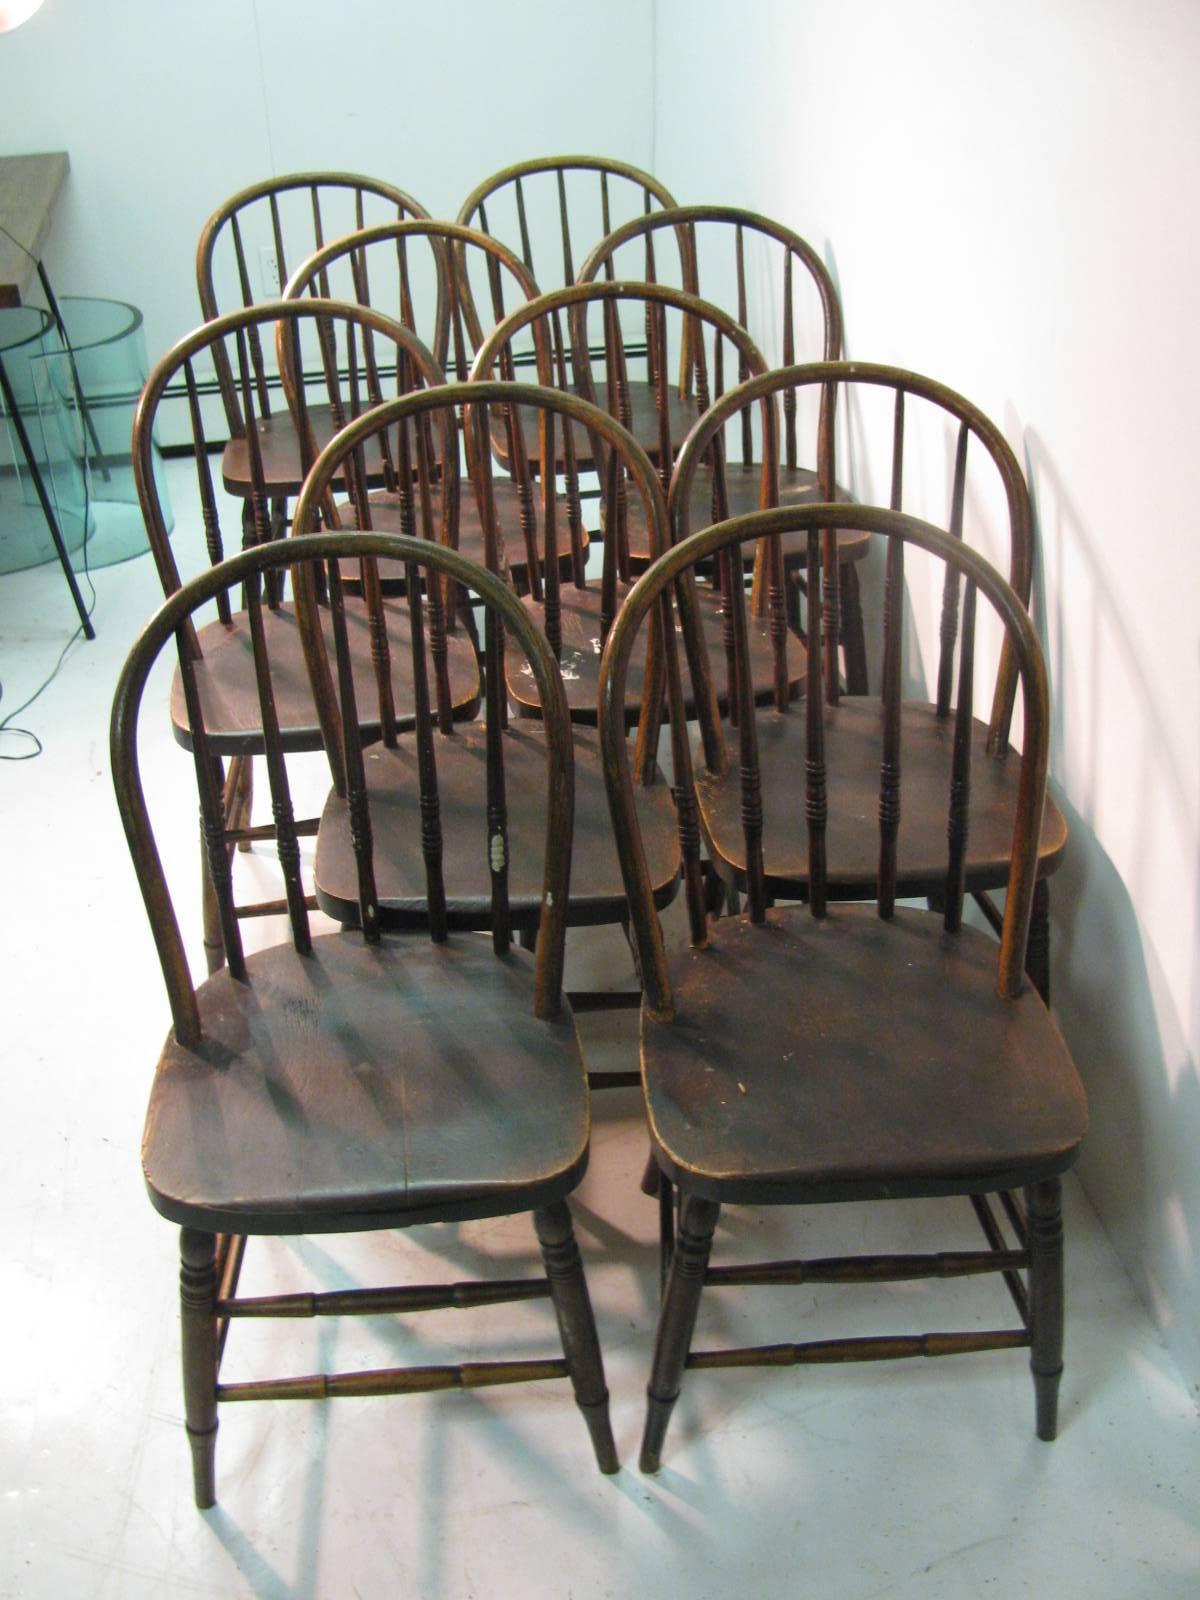 Set of ten windsor style chairs. Worn in the Ralph Lauren style, but tight, chairs have been reglued.